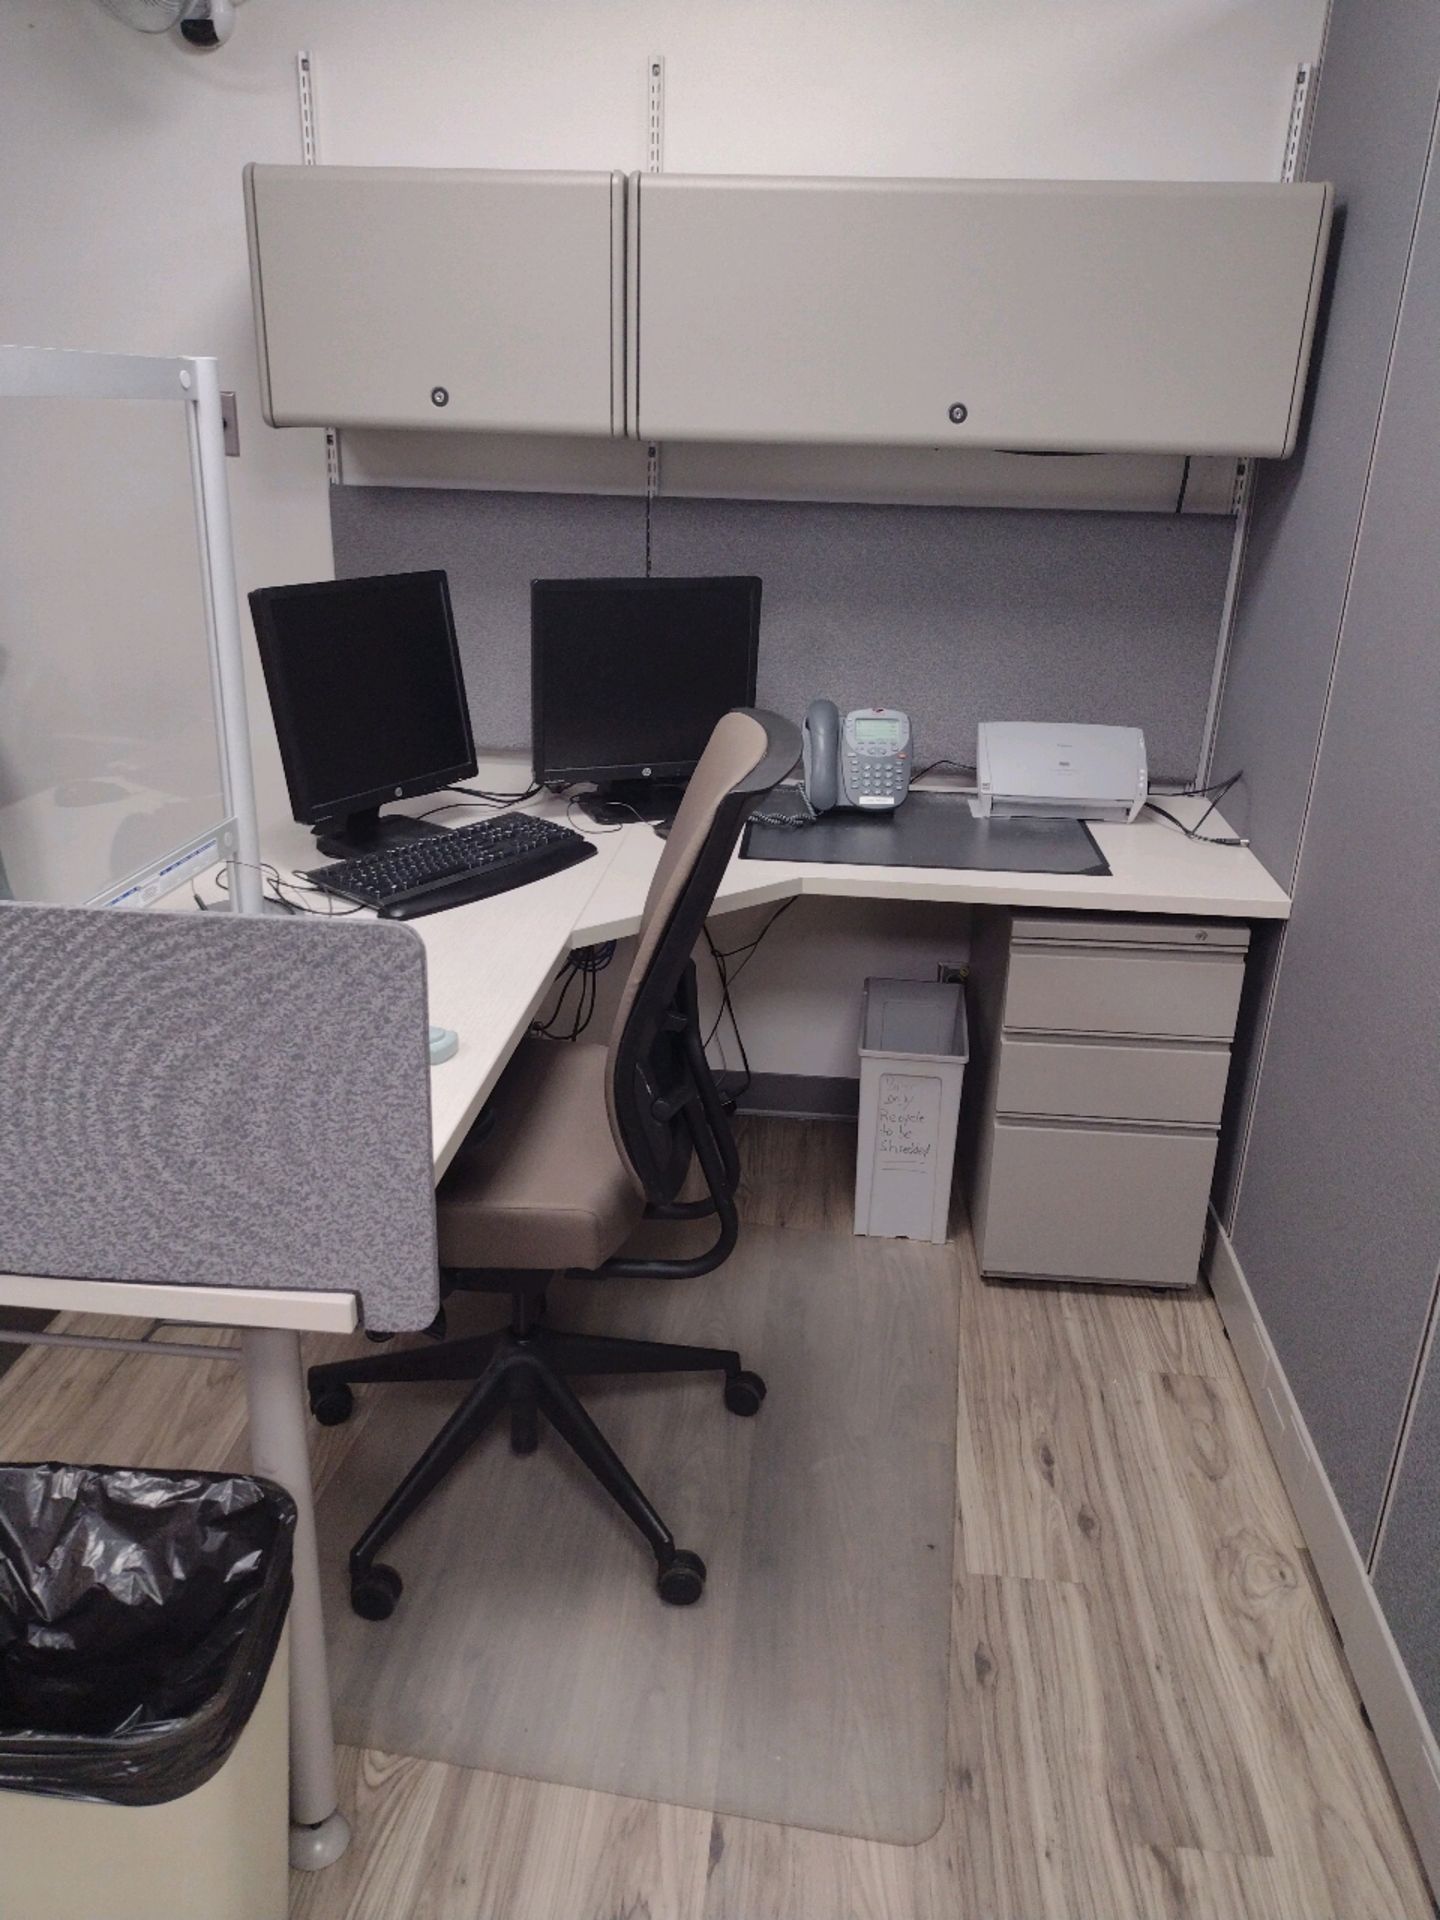 OFFICE SUITE INCLUDE: 6 WORKSTATION CUBICLE, LEXMARK PRINTER, HP PRINTER, 3- CANON DR-C130 - Image 3 of 12